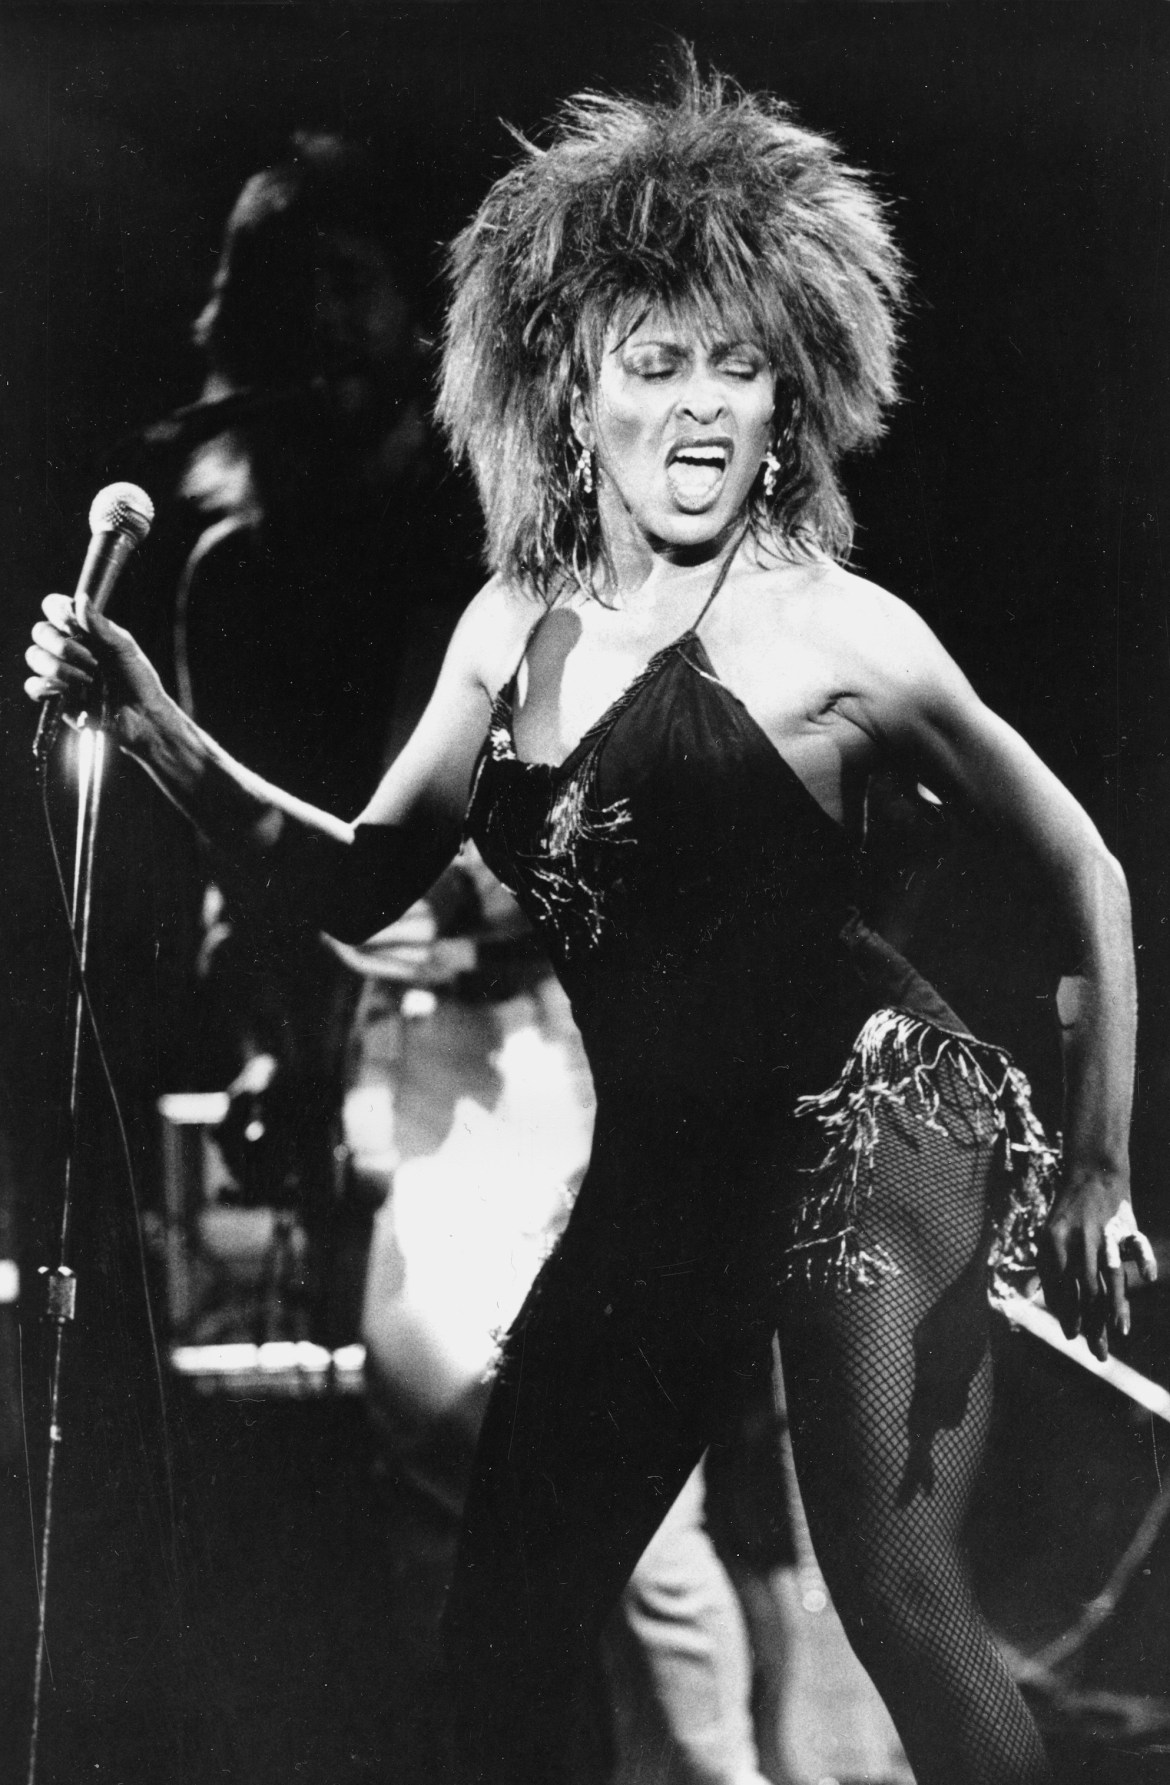 Tina Turner performs her current hit song "What's Love Got to Do With It"